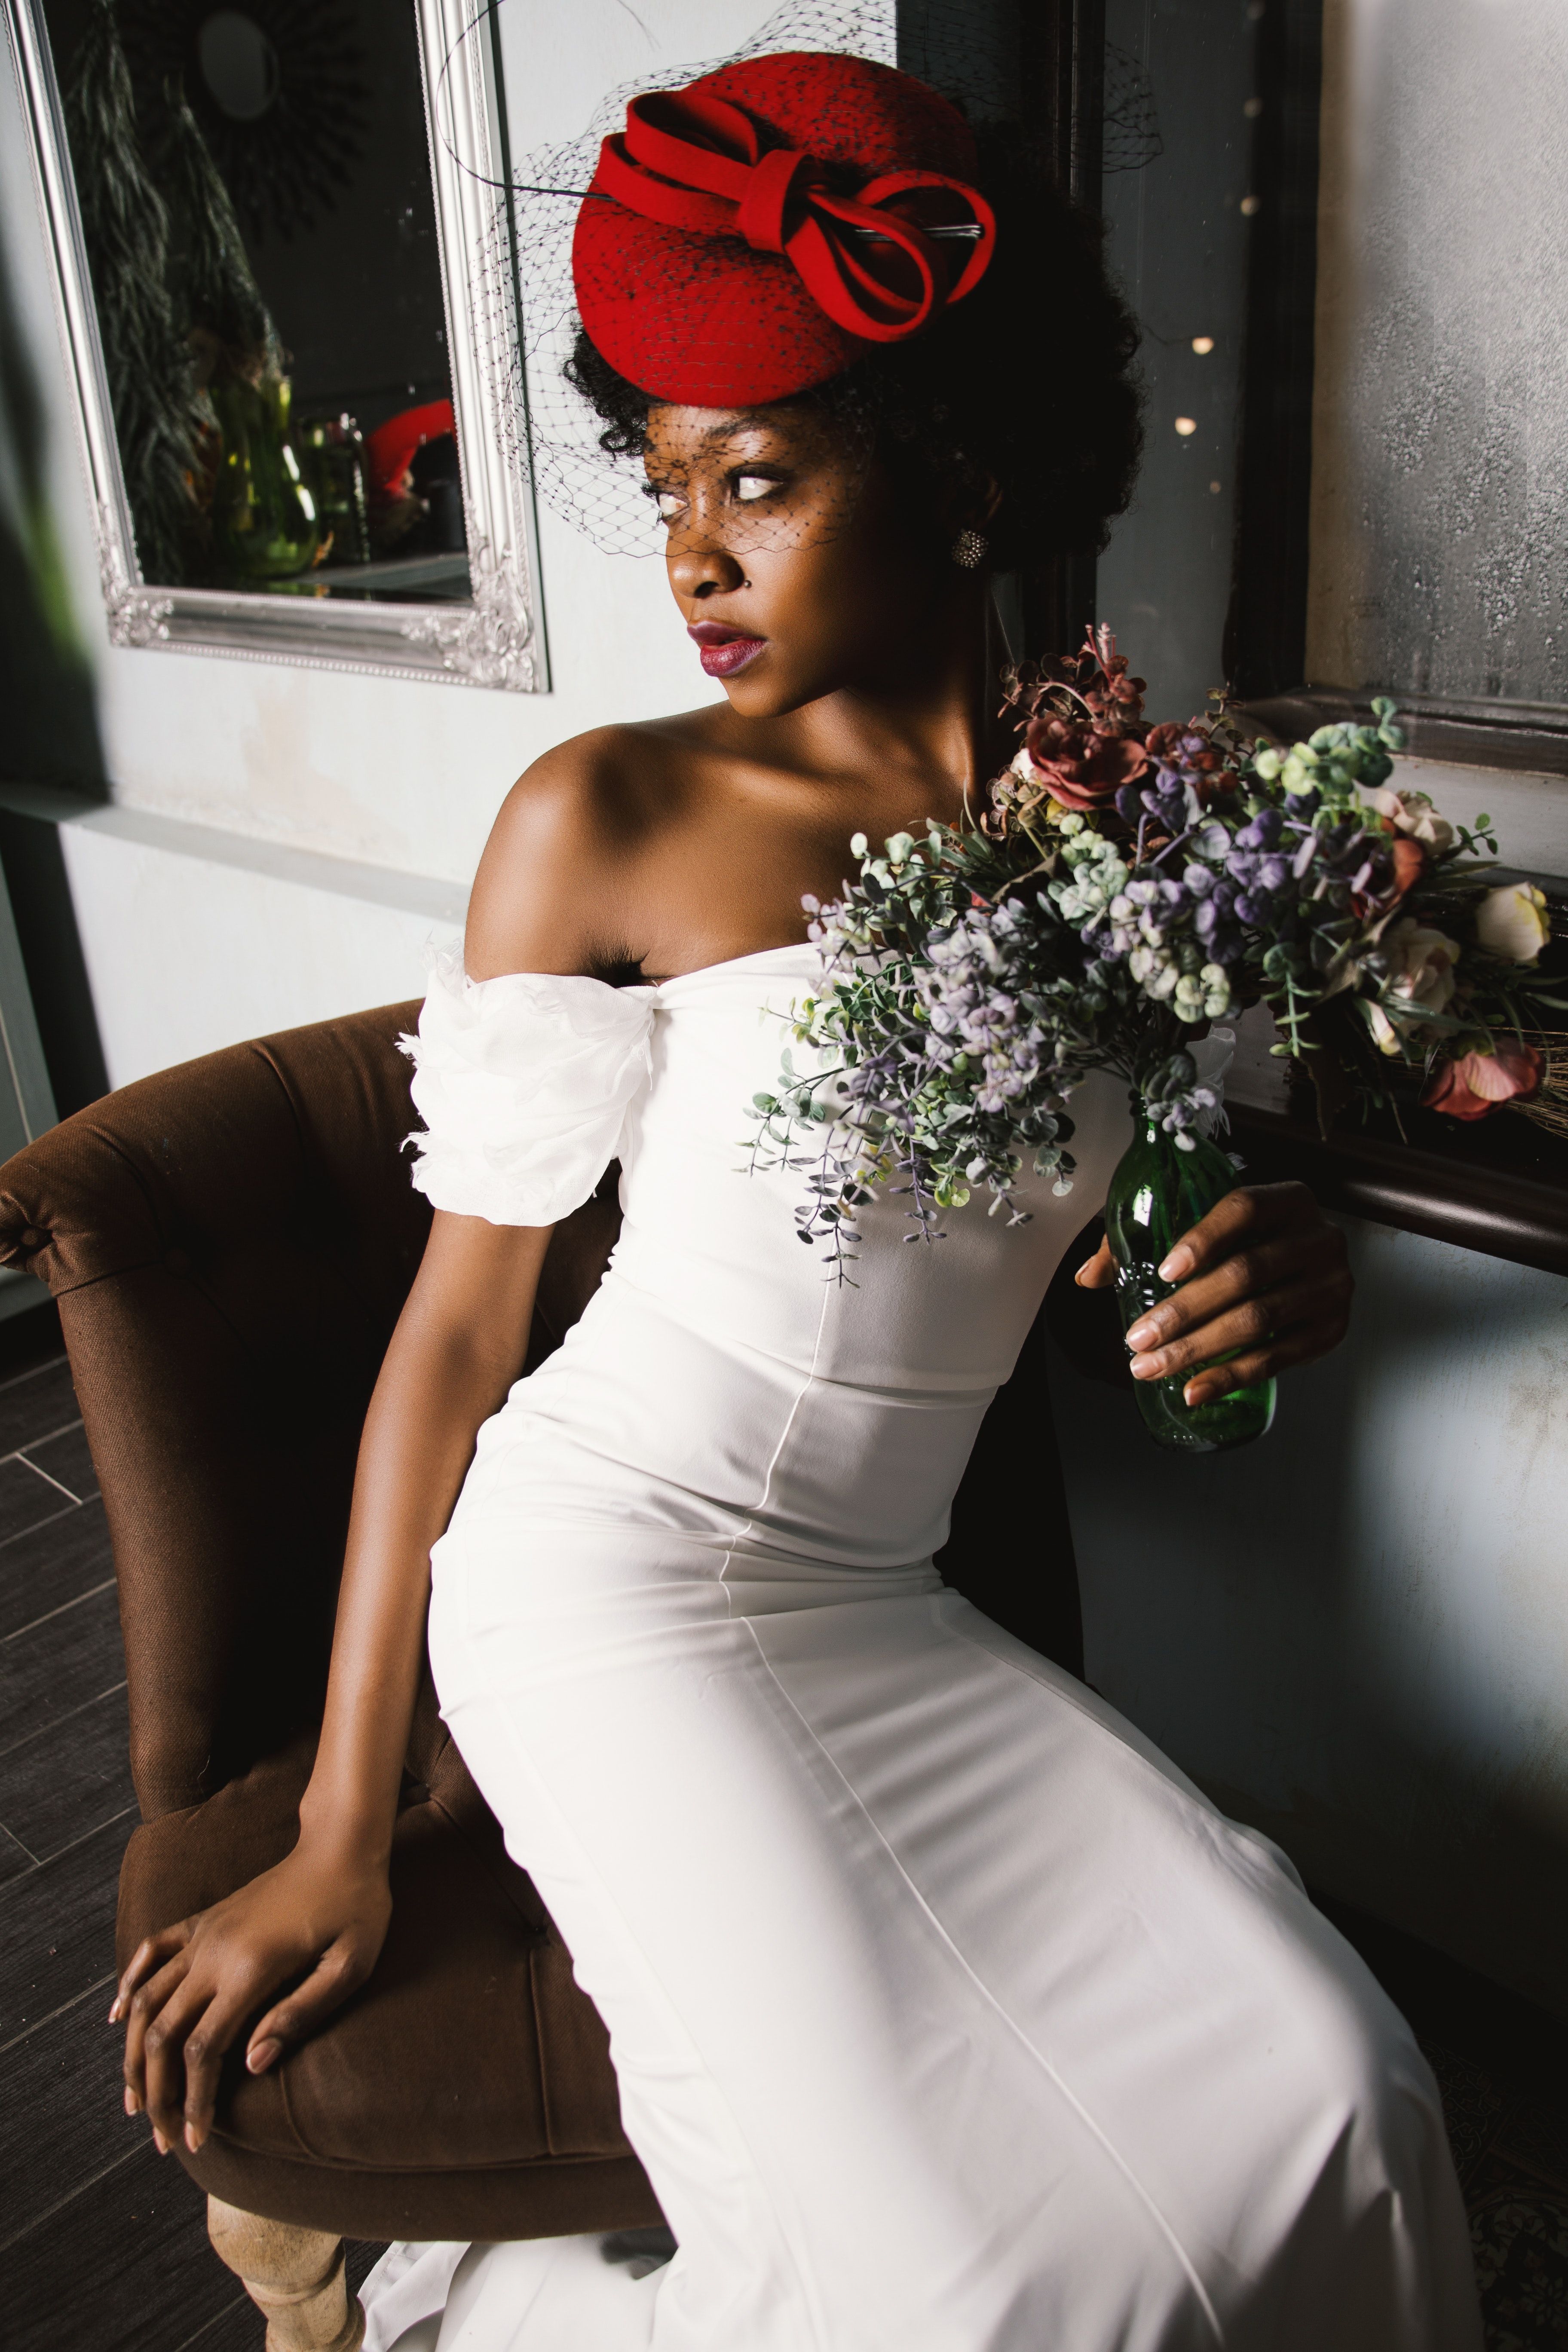 Woman Wearing White Off Shoulder Bodycon Dress Holding Flower